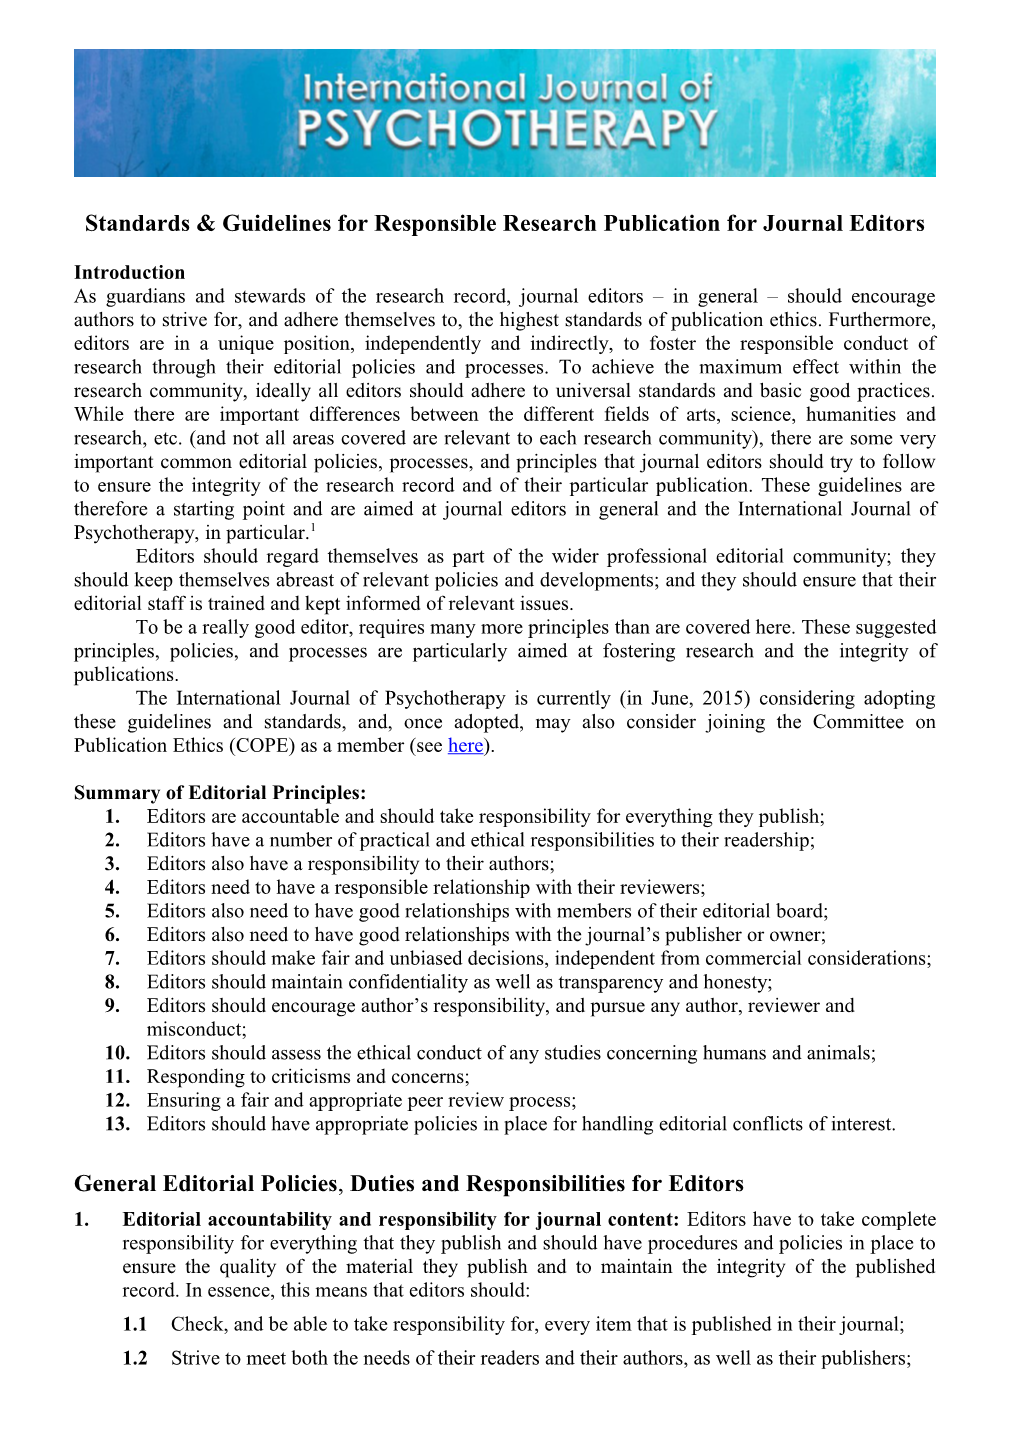 Standards & Guidelines for Responsible Research Publication for Journal Editors